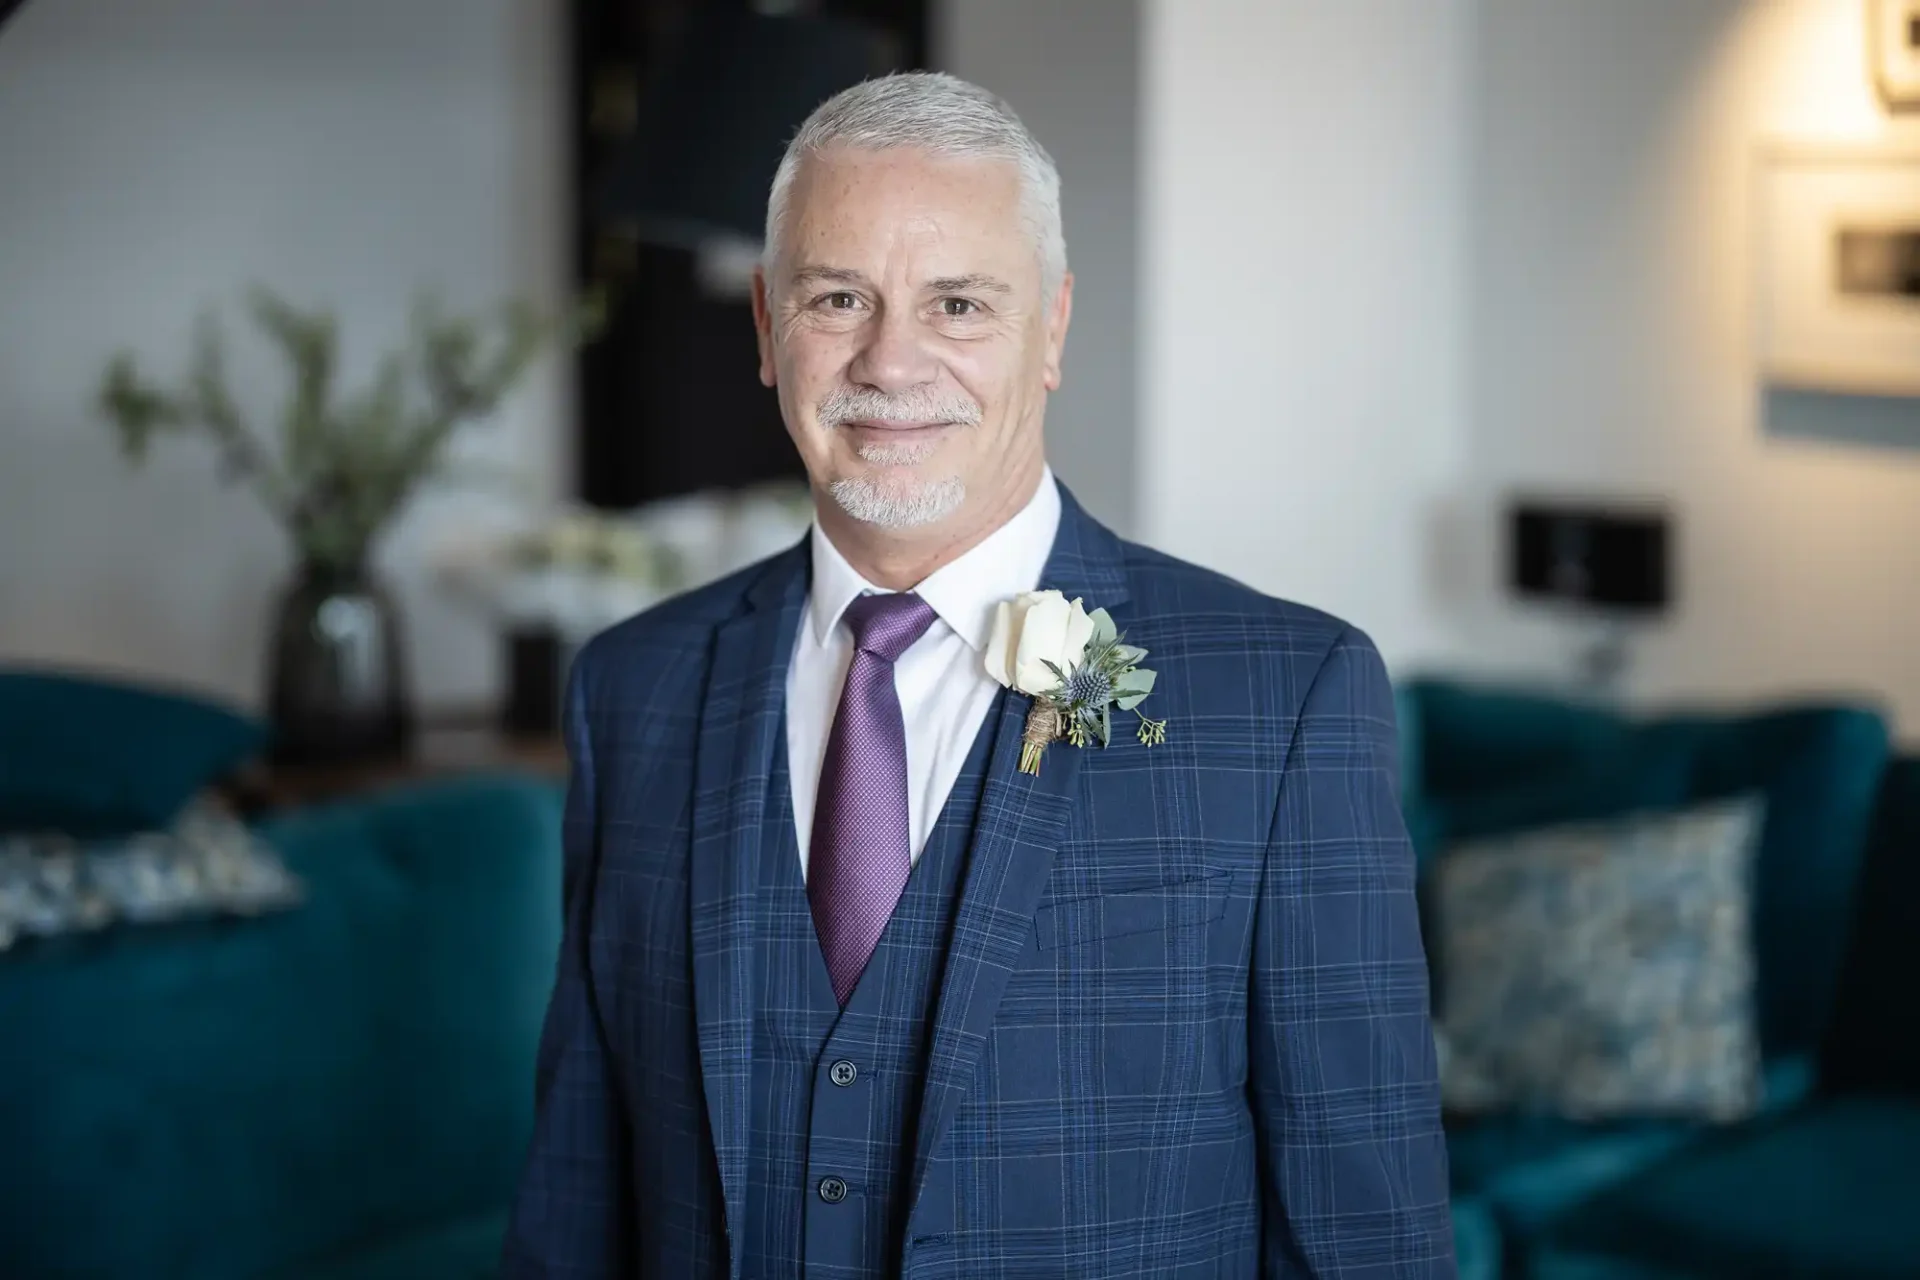 A mature man in a blue checkered suit and purple tie, smiling at a wedding, with a white boutonniere and blurred interior background.